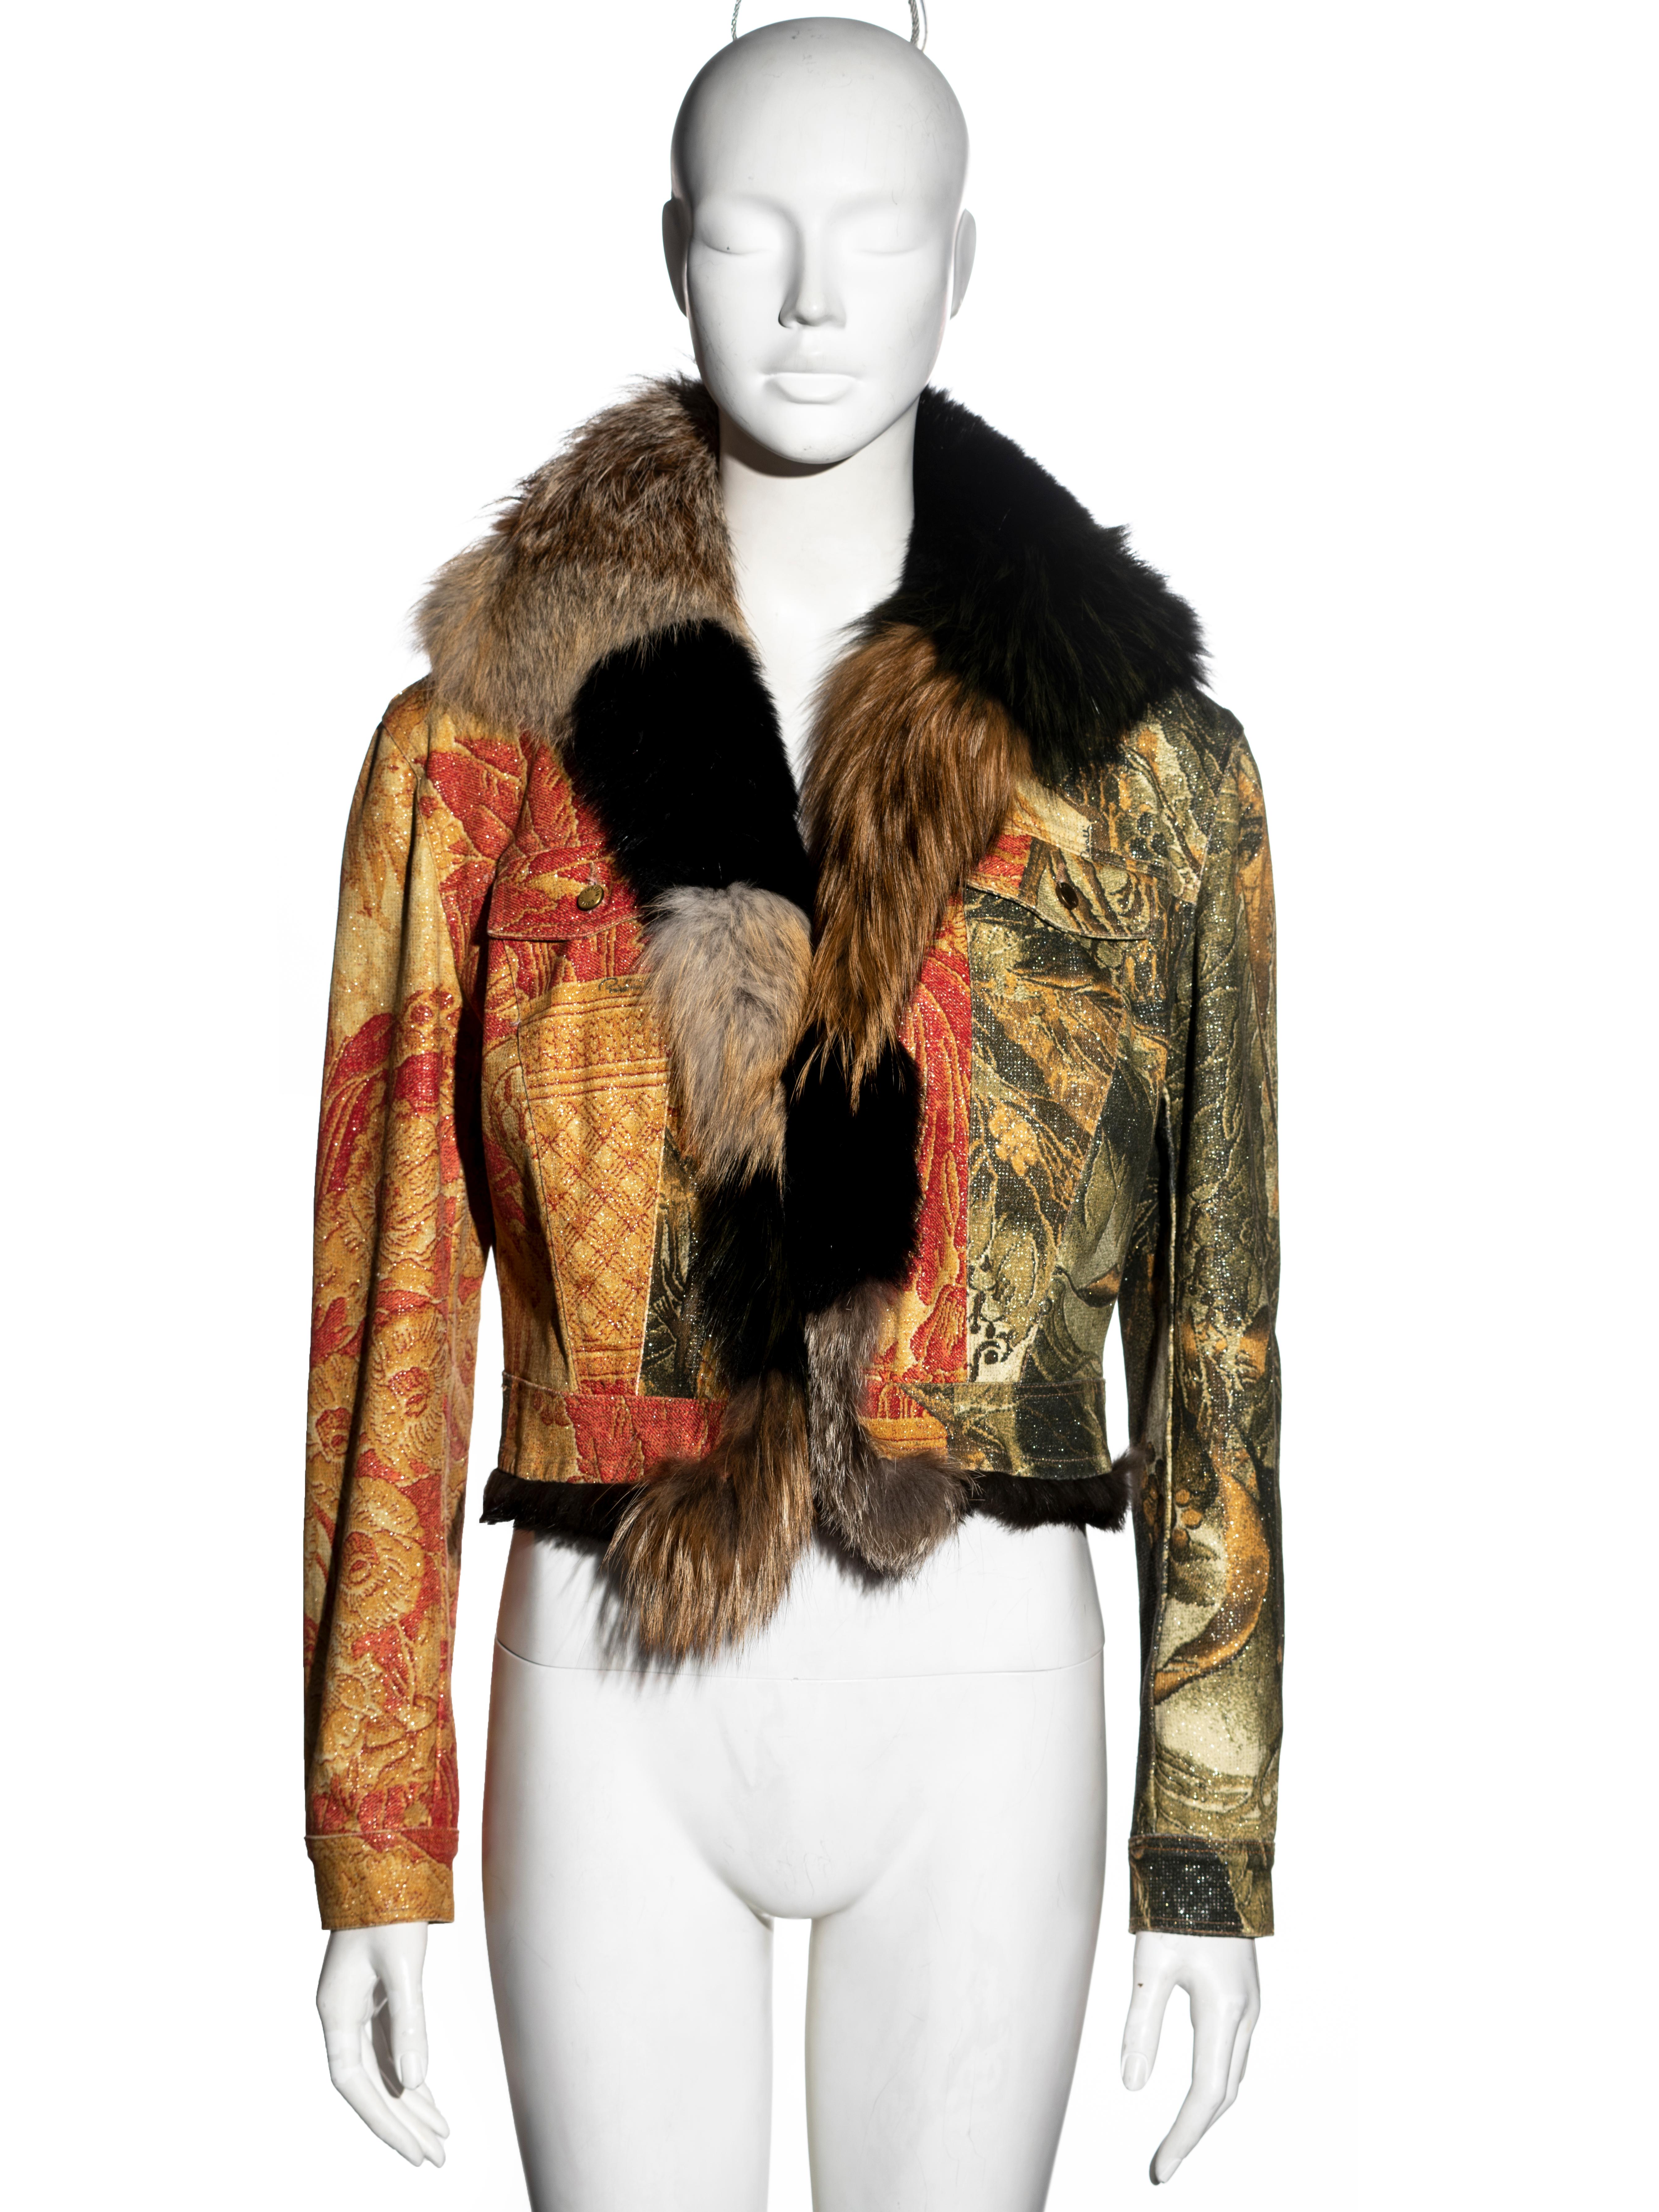 ▪ Robert Cavalli printed jean jacket
▪ Montage print in brown, red and gold tones 
▪ Fox fur collar in brown and black stripes
▪ Rabbit fur interior 
▪ Size Large
▪ Fall-Winter 2001
▪ Made in Italy